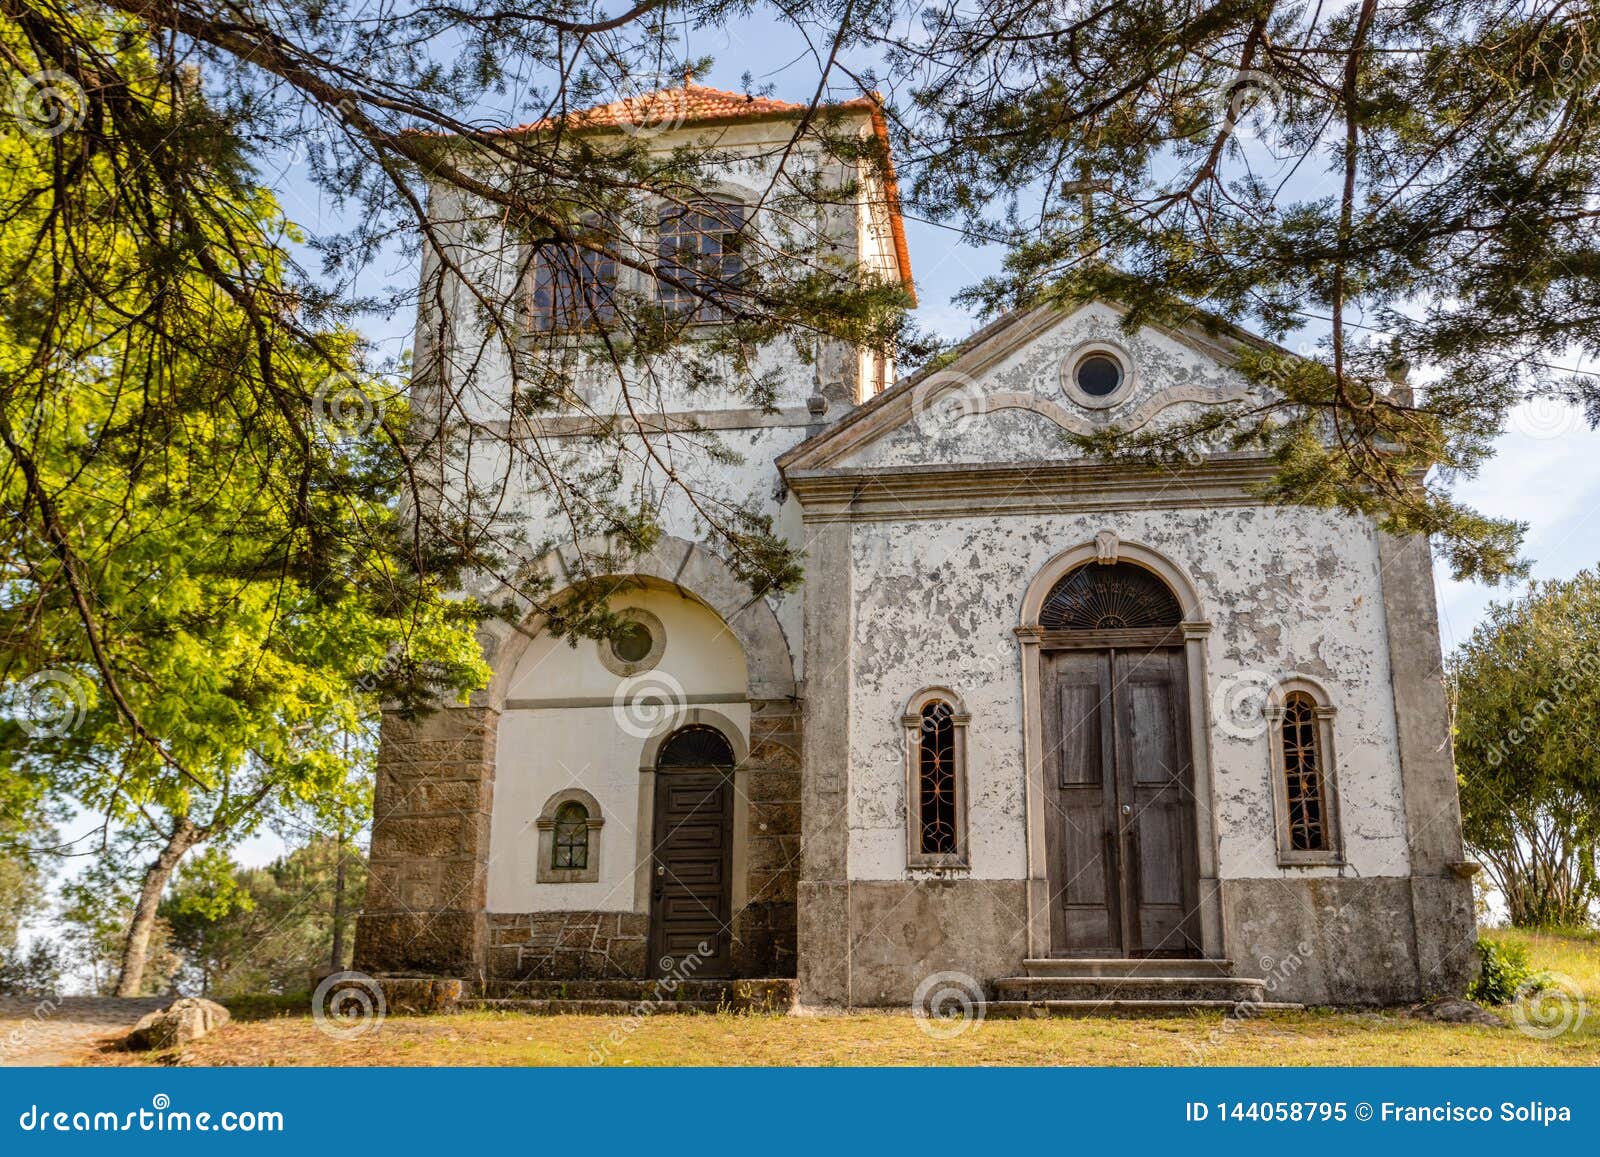 church among  trees at summer time, in figueiro dos vinhos, portugal